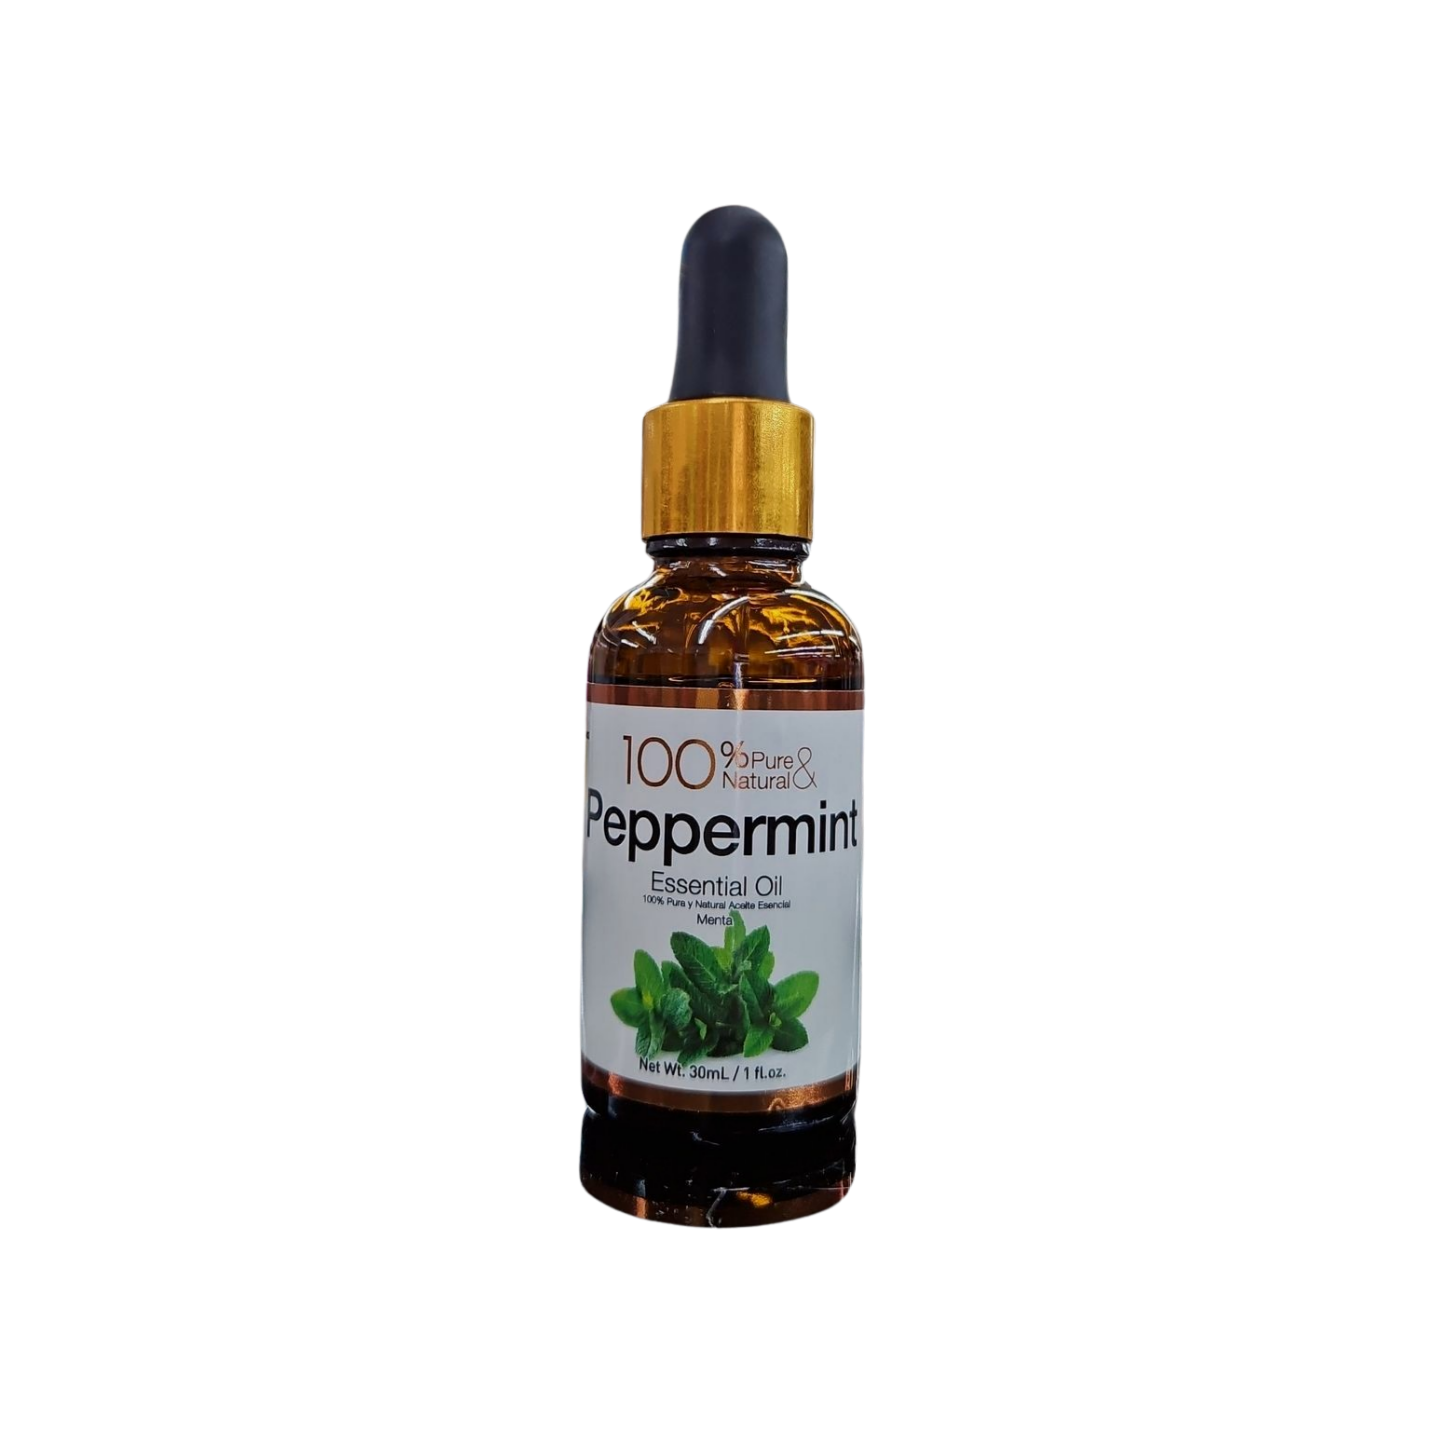 100% pure peppermint oil